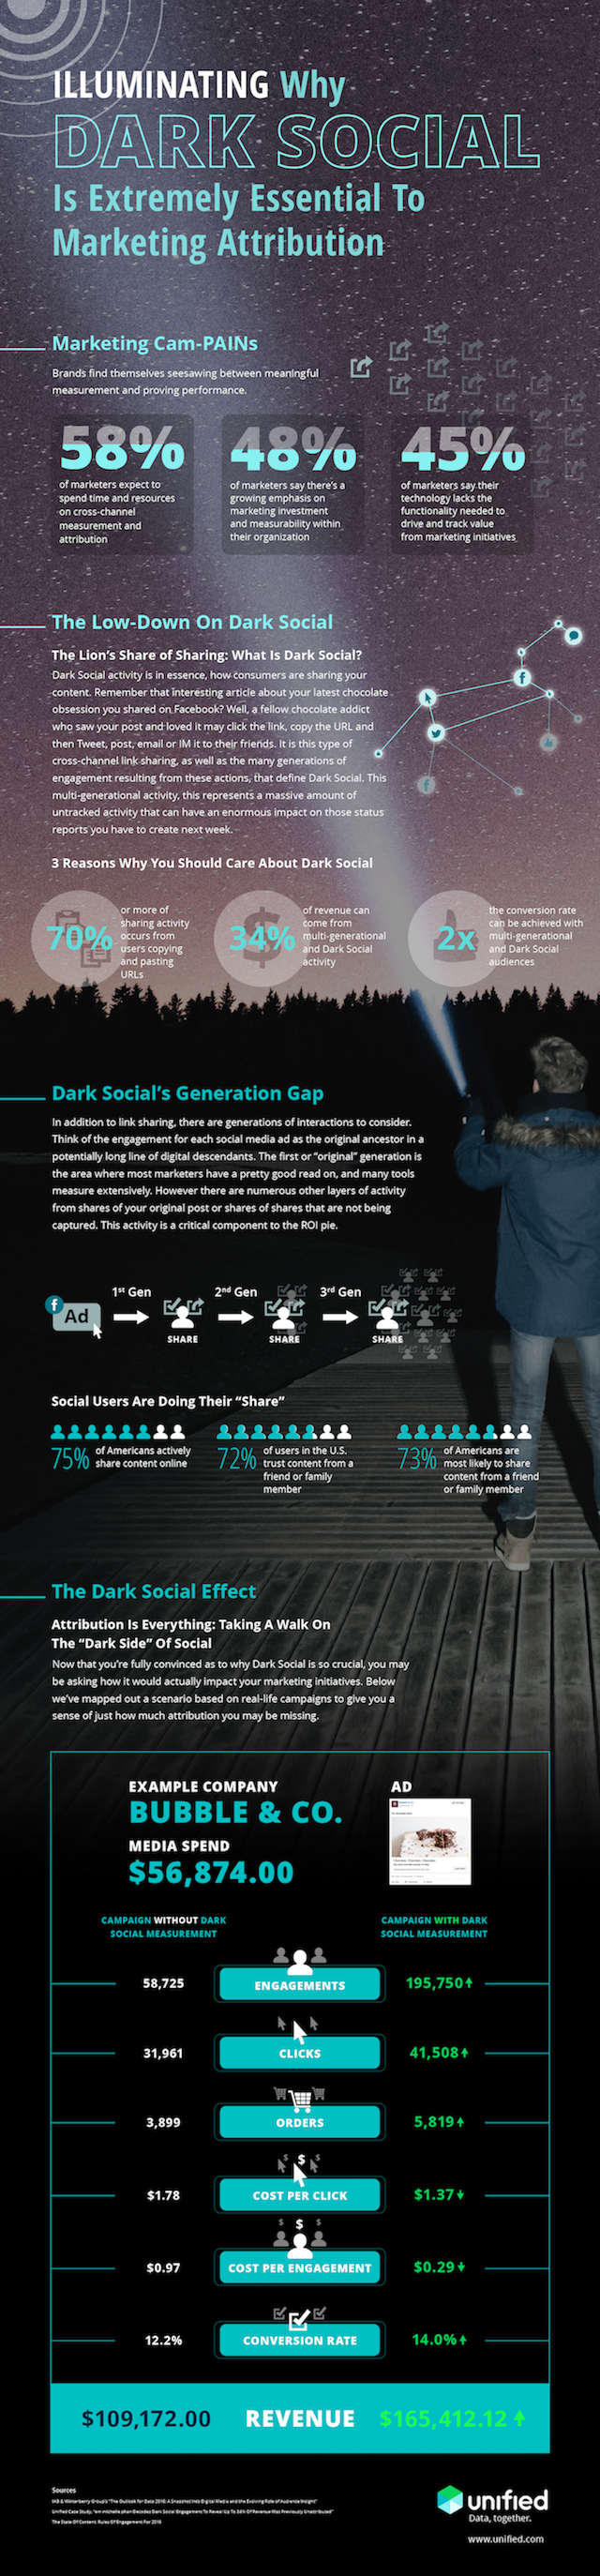 illuminating-why-dark-social-is-extremely-essential-to-marketing-attribution-full